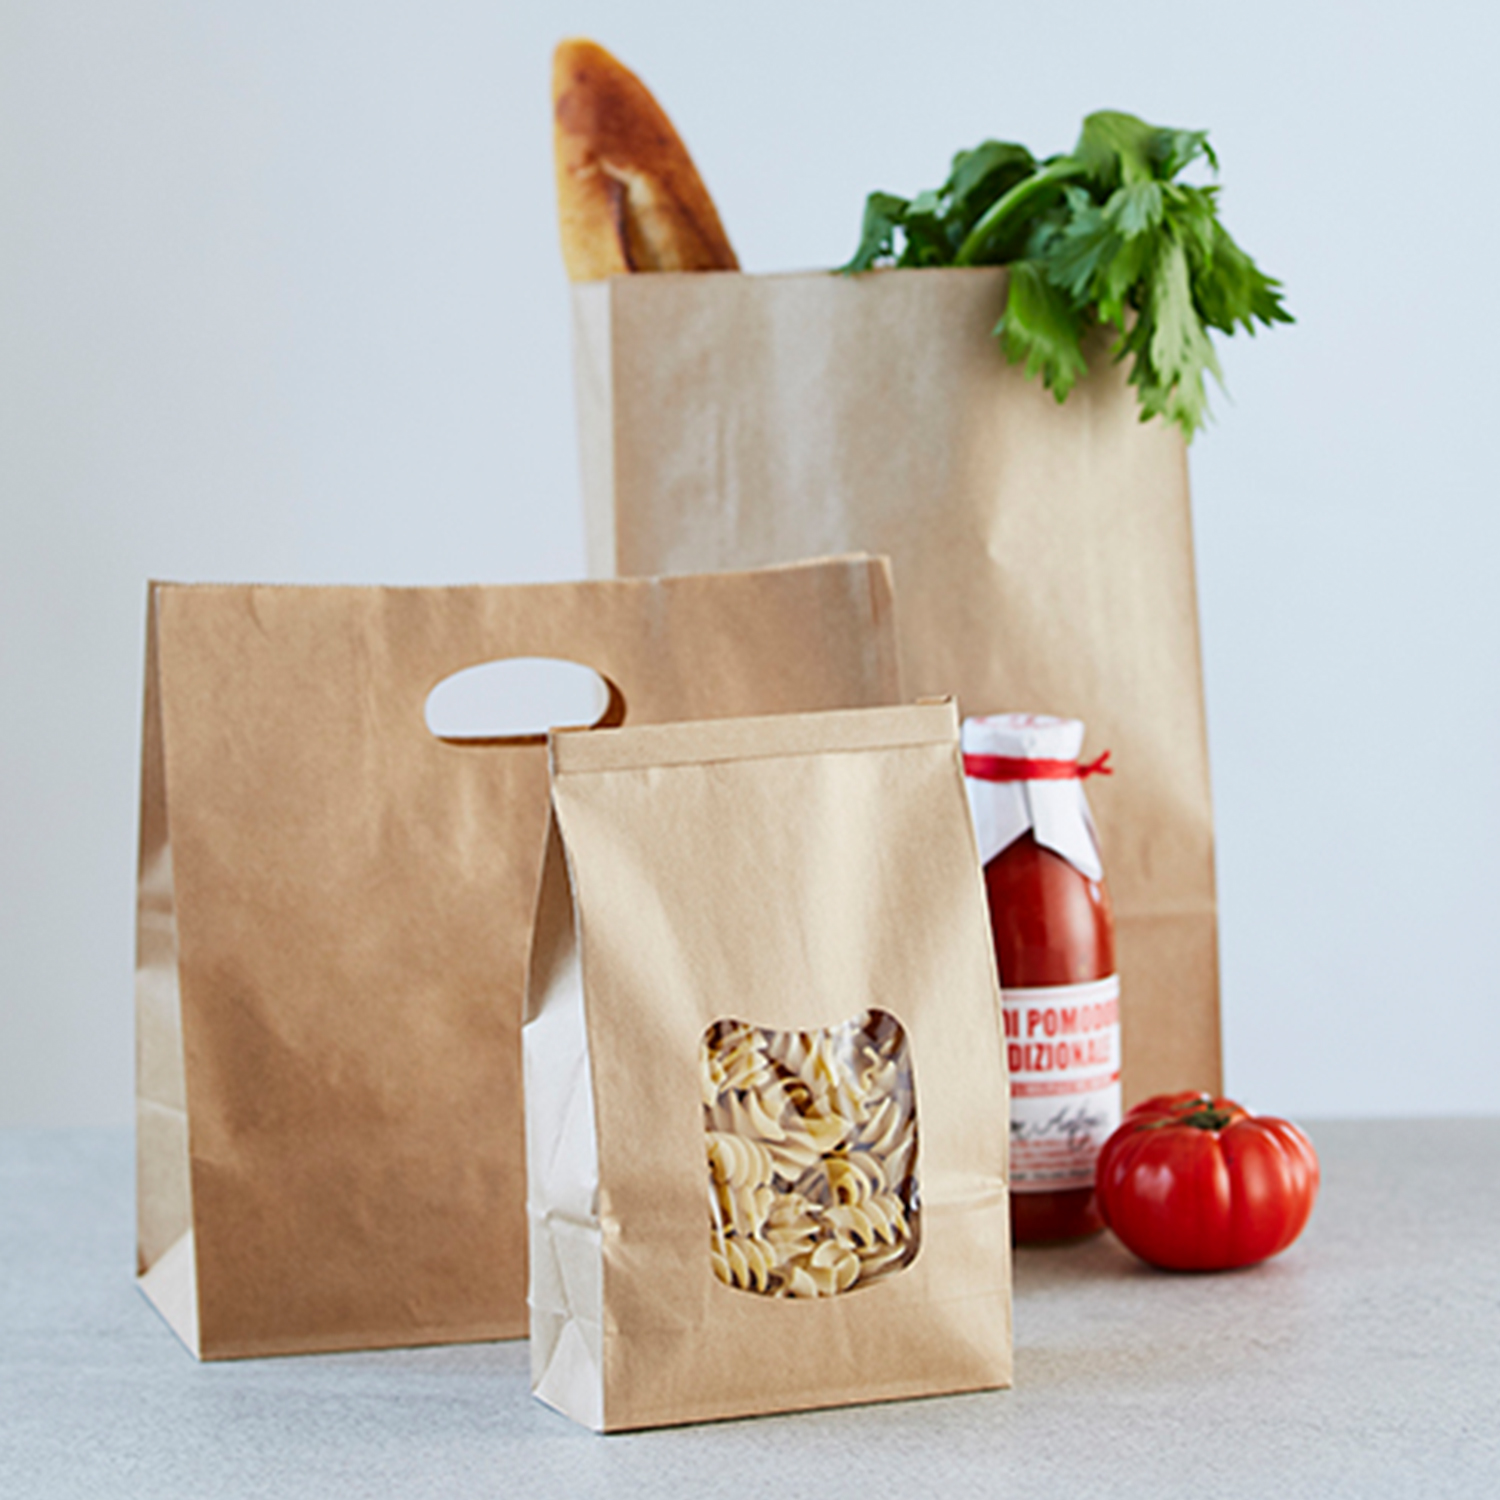 Image of three paper bags with groceries